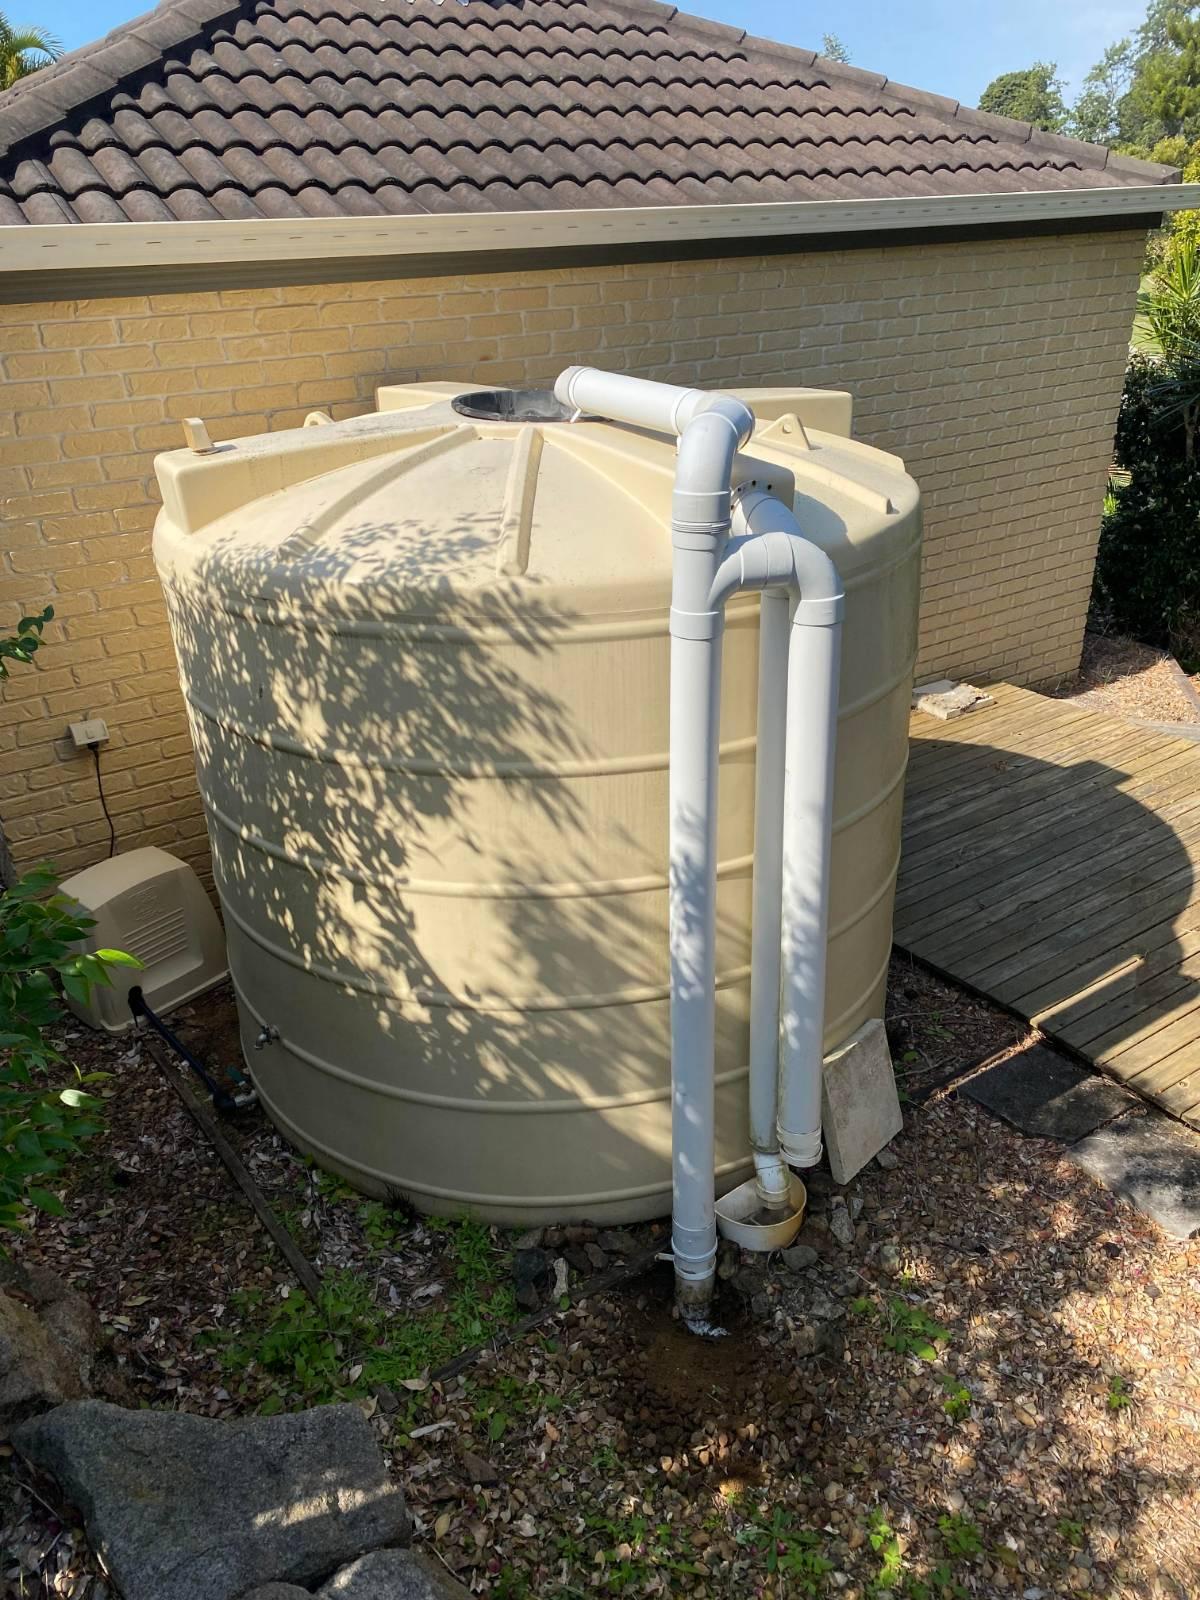 How does this rainwater system work